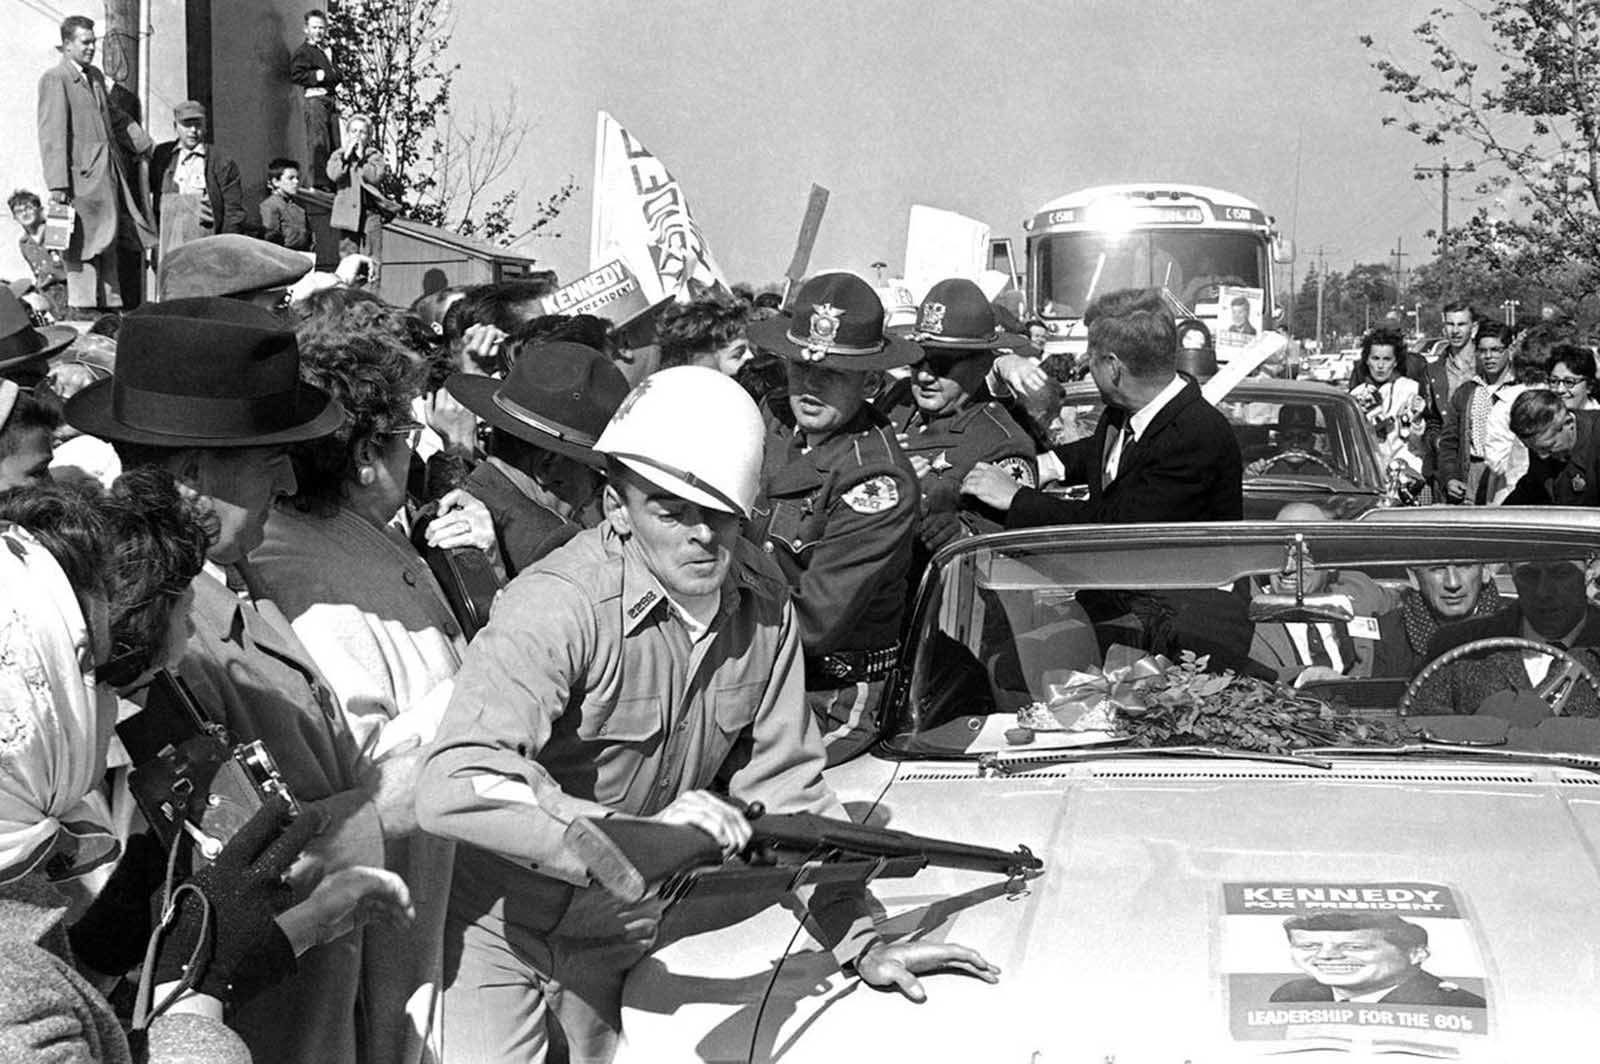 Helmet askew, rifle definitely not at the ready, man in military uniform is jammed against fender of car bearing the Democrats' presidential nominee, on October 25, 1960 in Elgin, Illinois. 